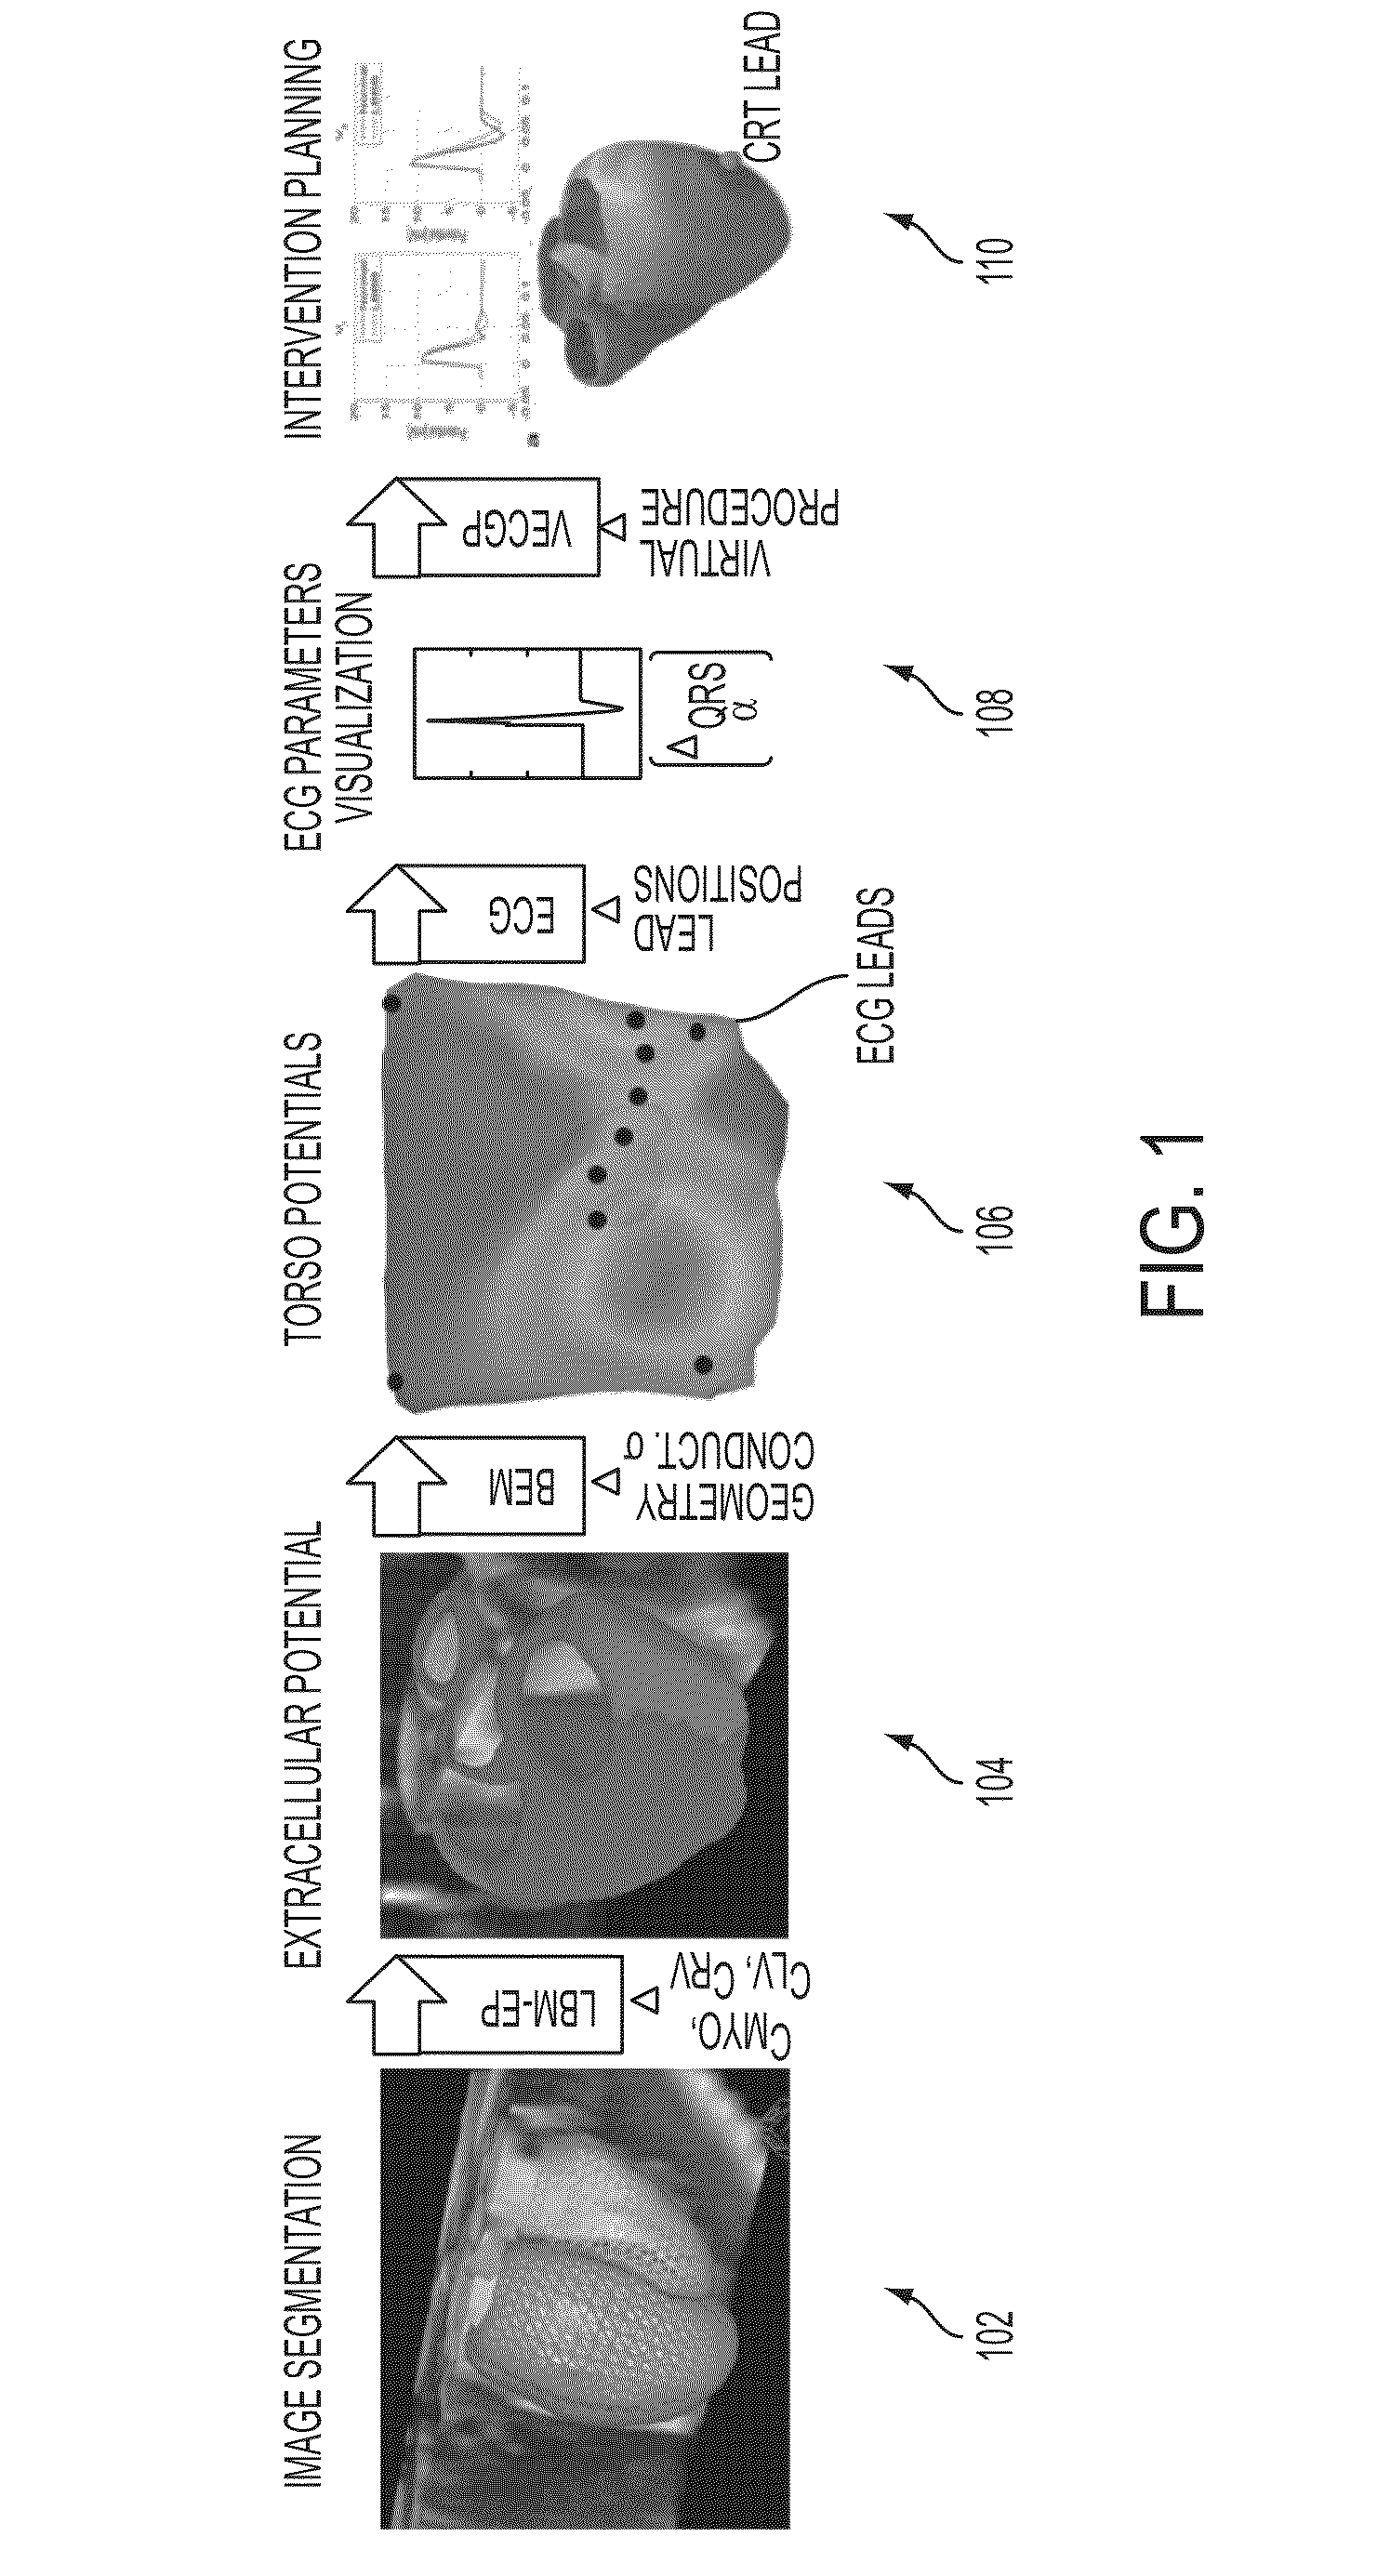 System and Method for Patient Specific Planning and Guidance of Electrophysiology Interventions